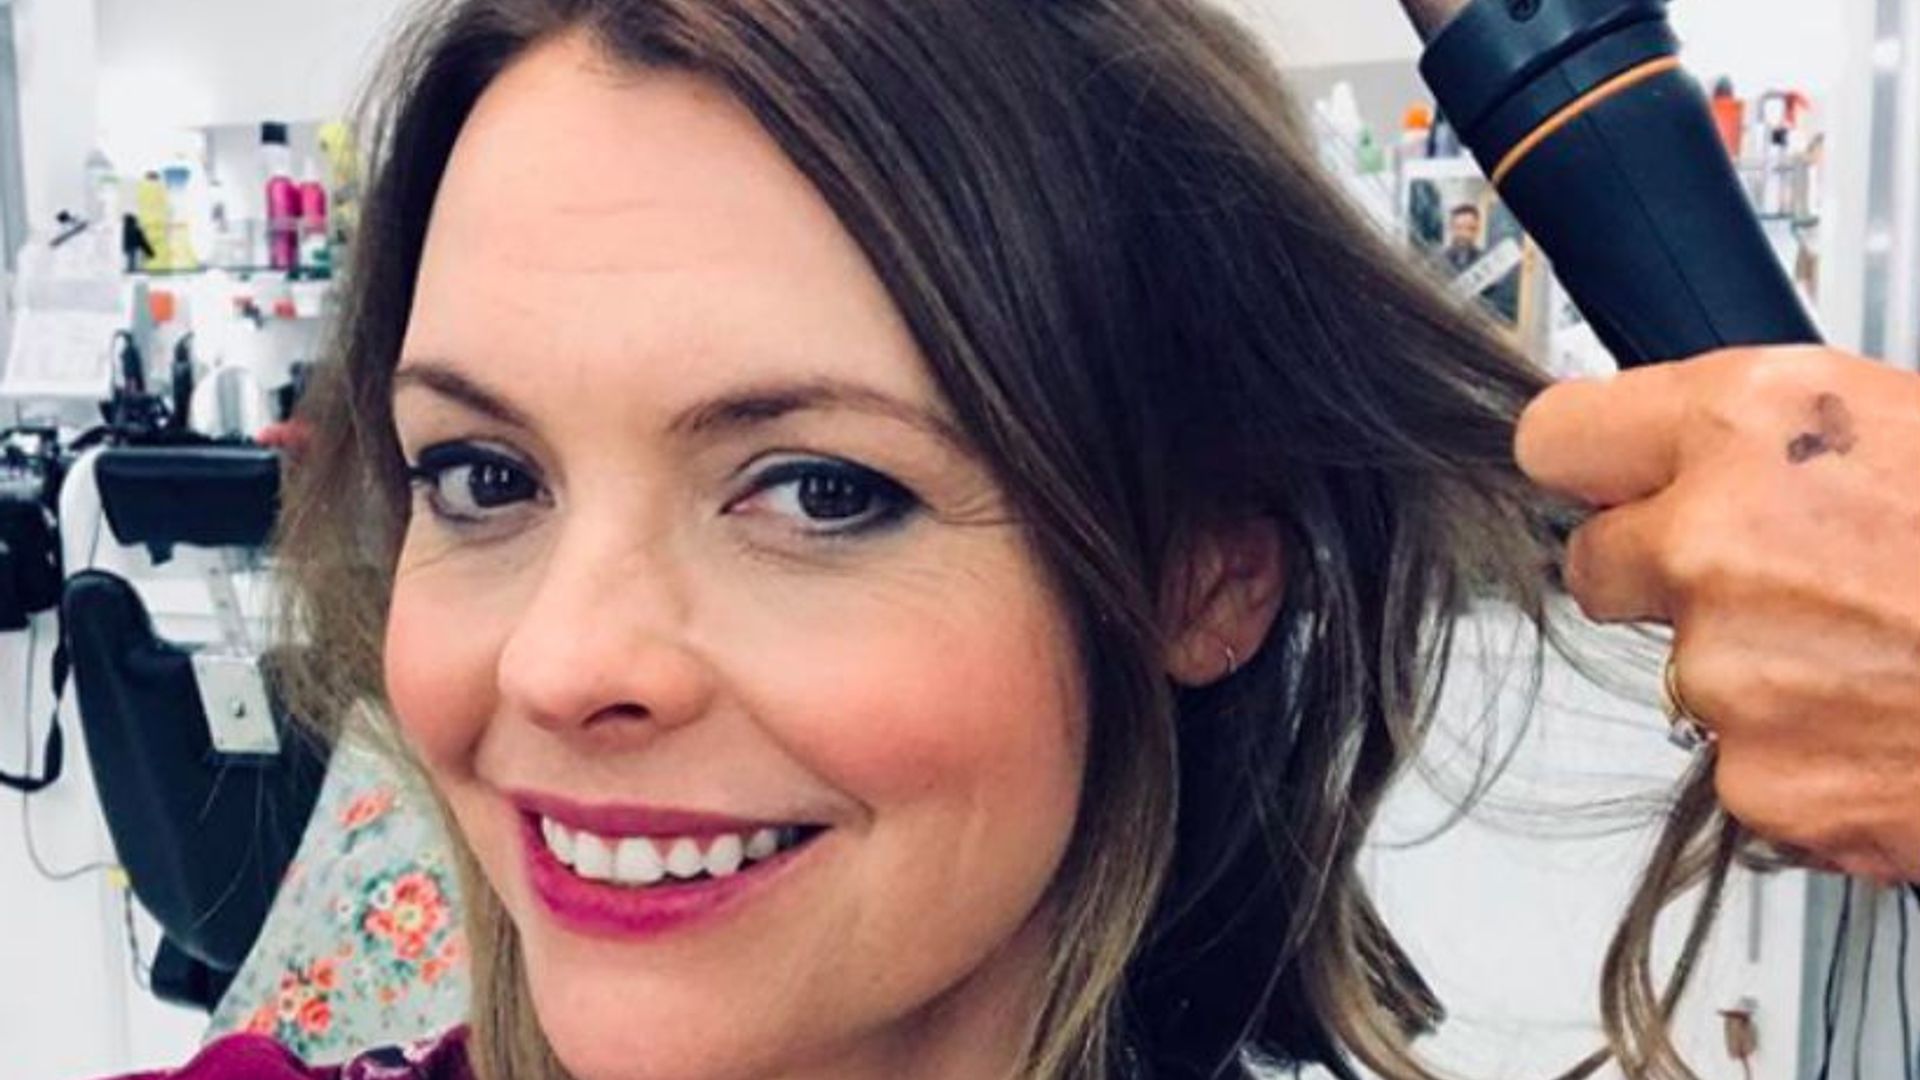 Coronation Street's Kate Ford has a gorgeous new hairstyle